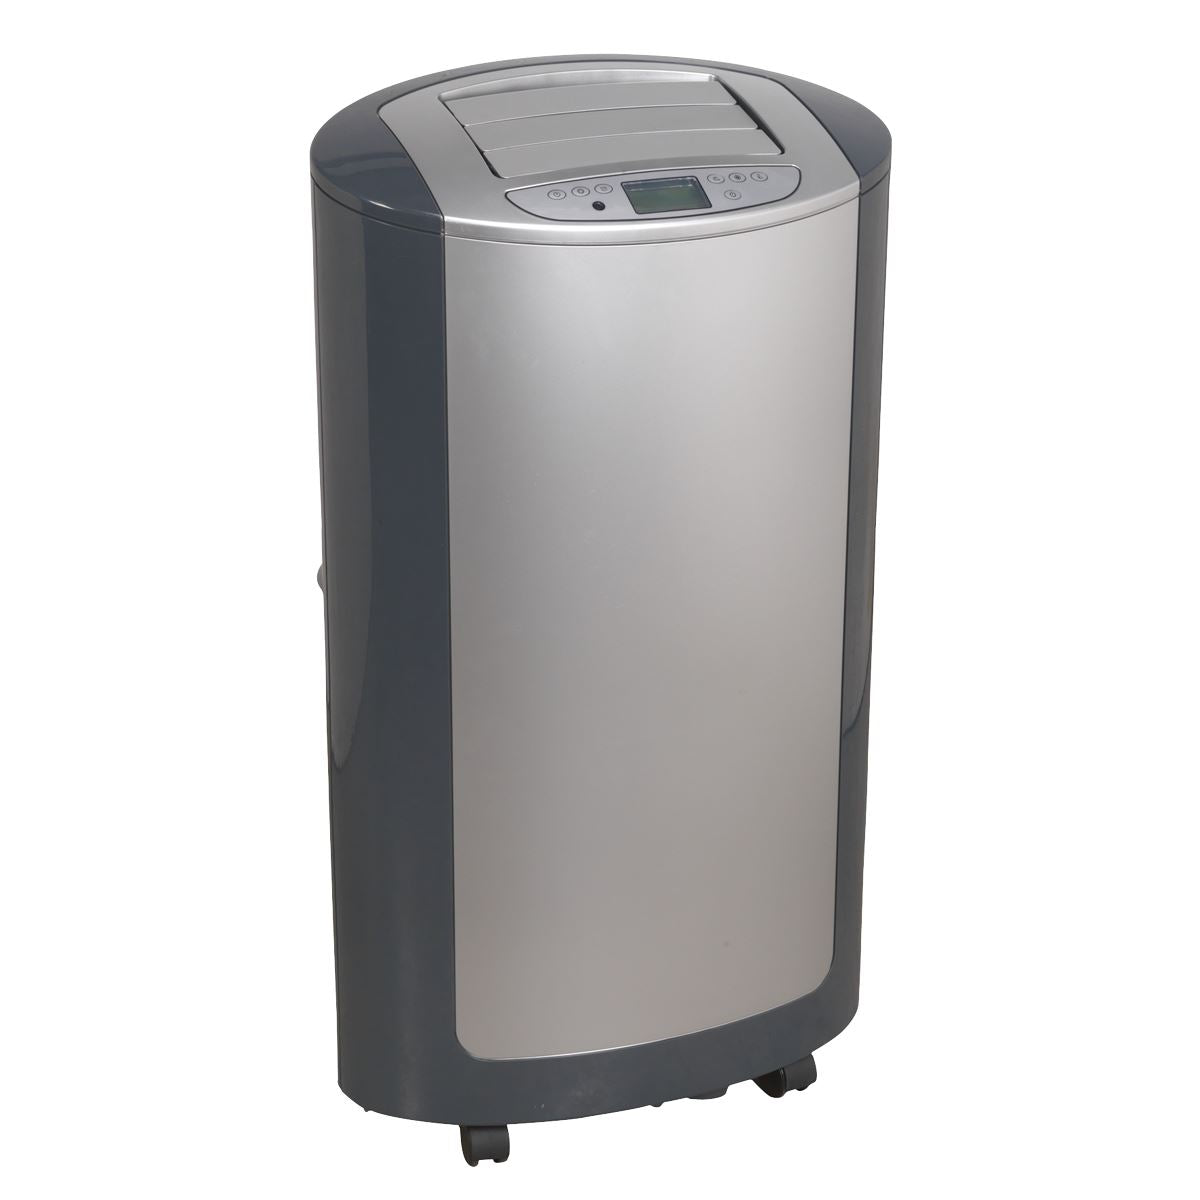 Sealey Portable Air Conditioner/Dehumidifier/Air Cooler/Heater with Window Sealing Kit 12,000Btu/hr